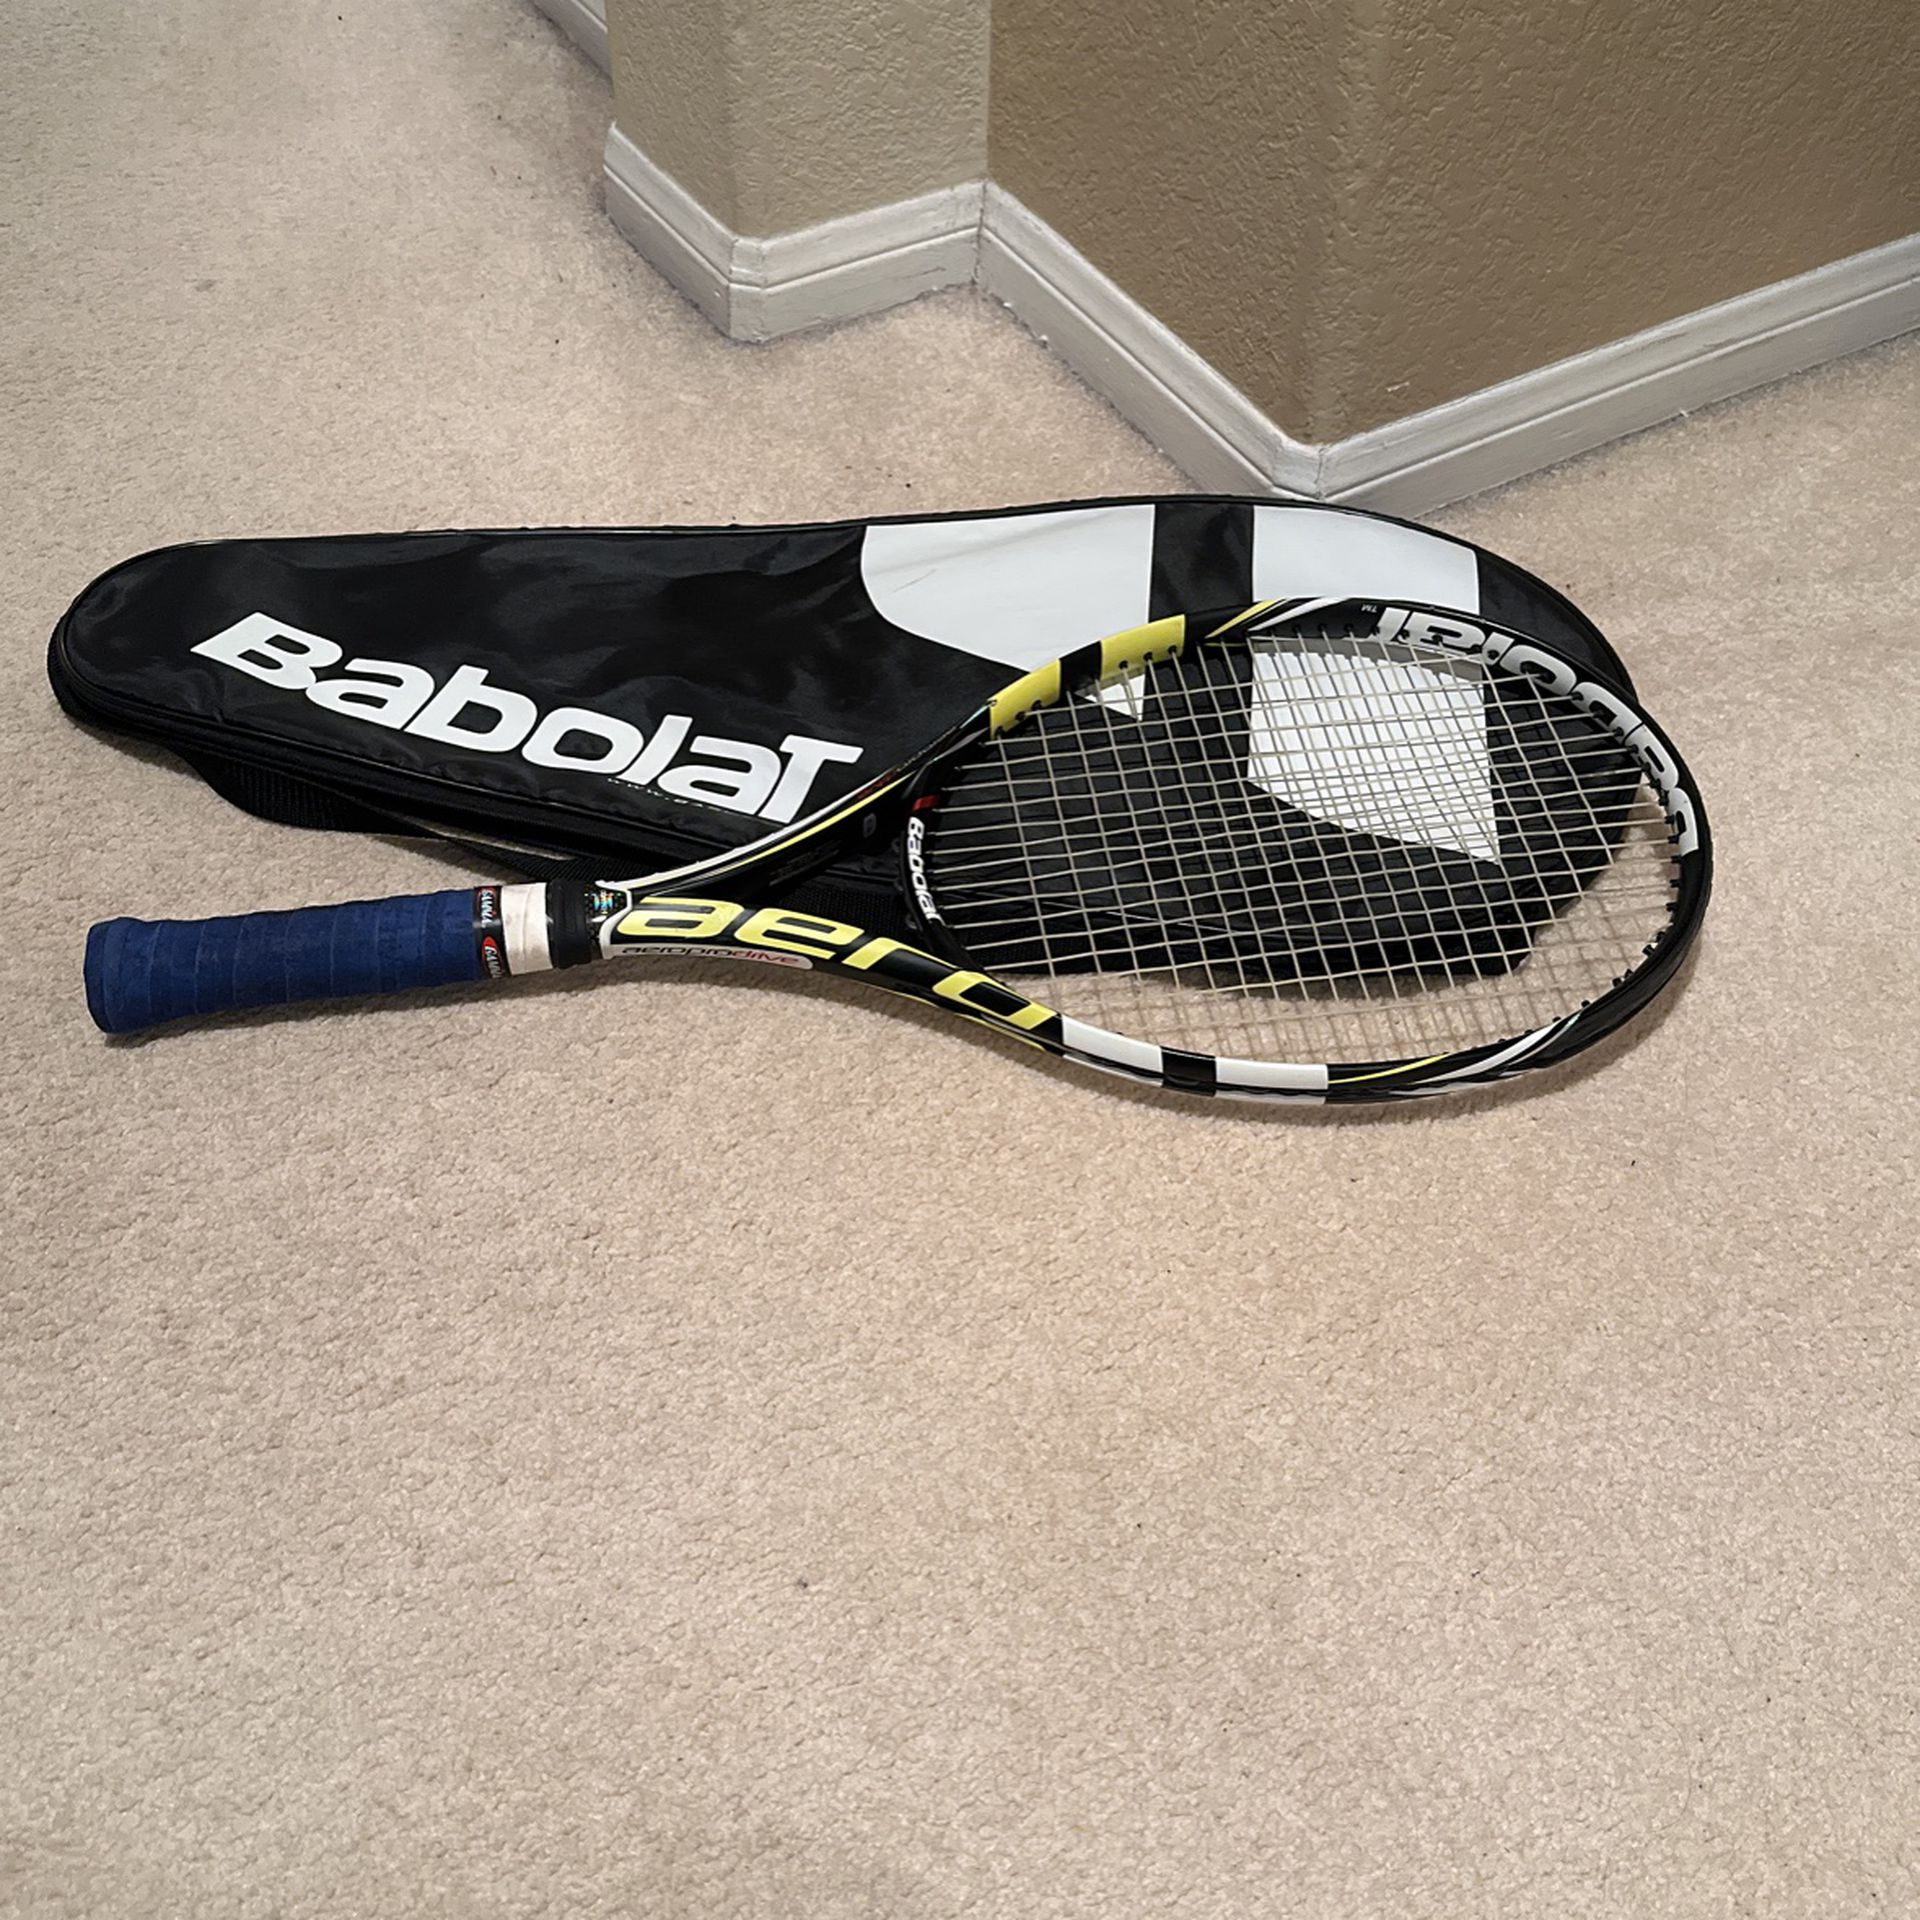 Babolat Aeropro Drive Tennis Racket.  Used But In Very Good Condition